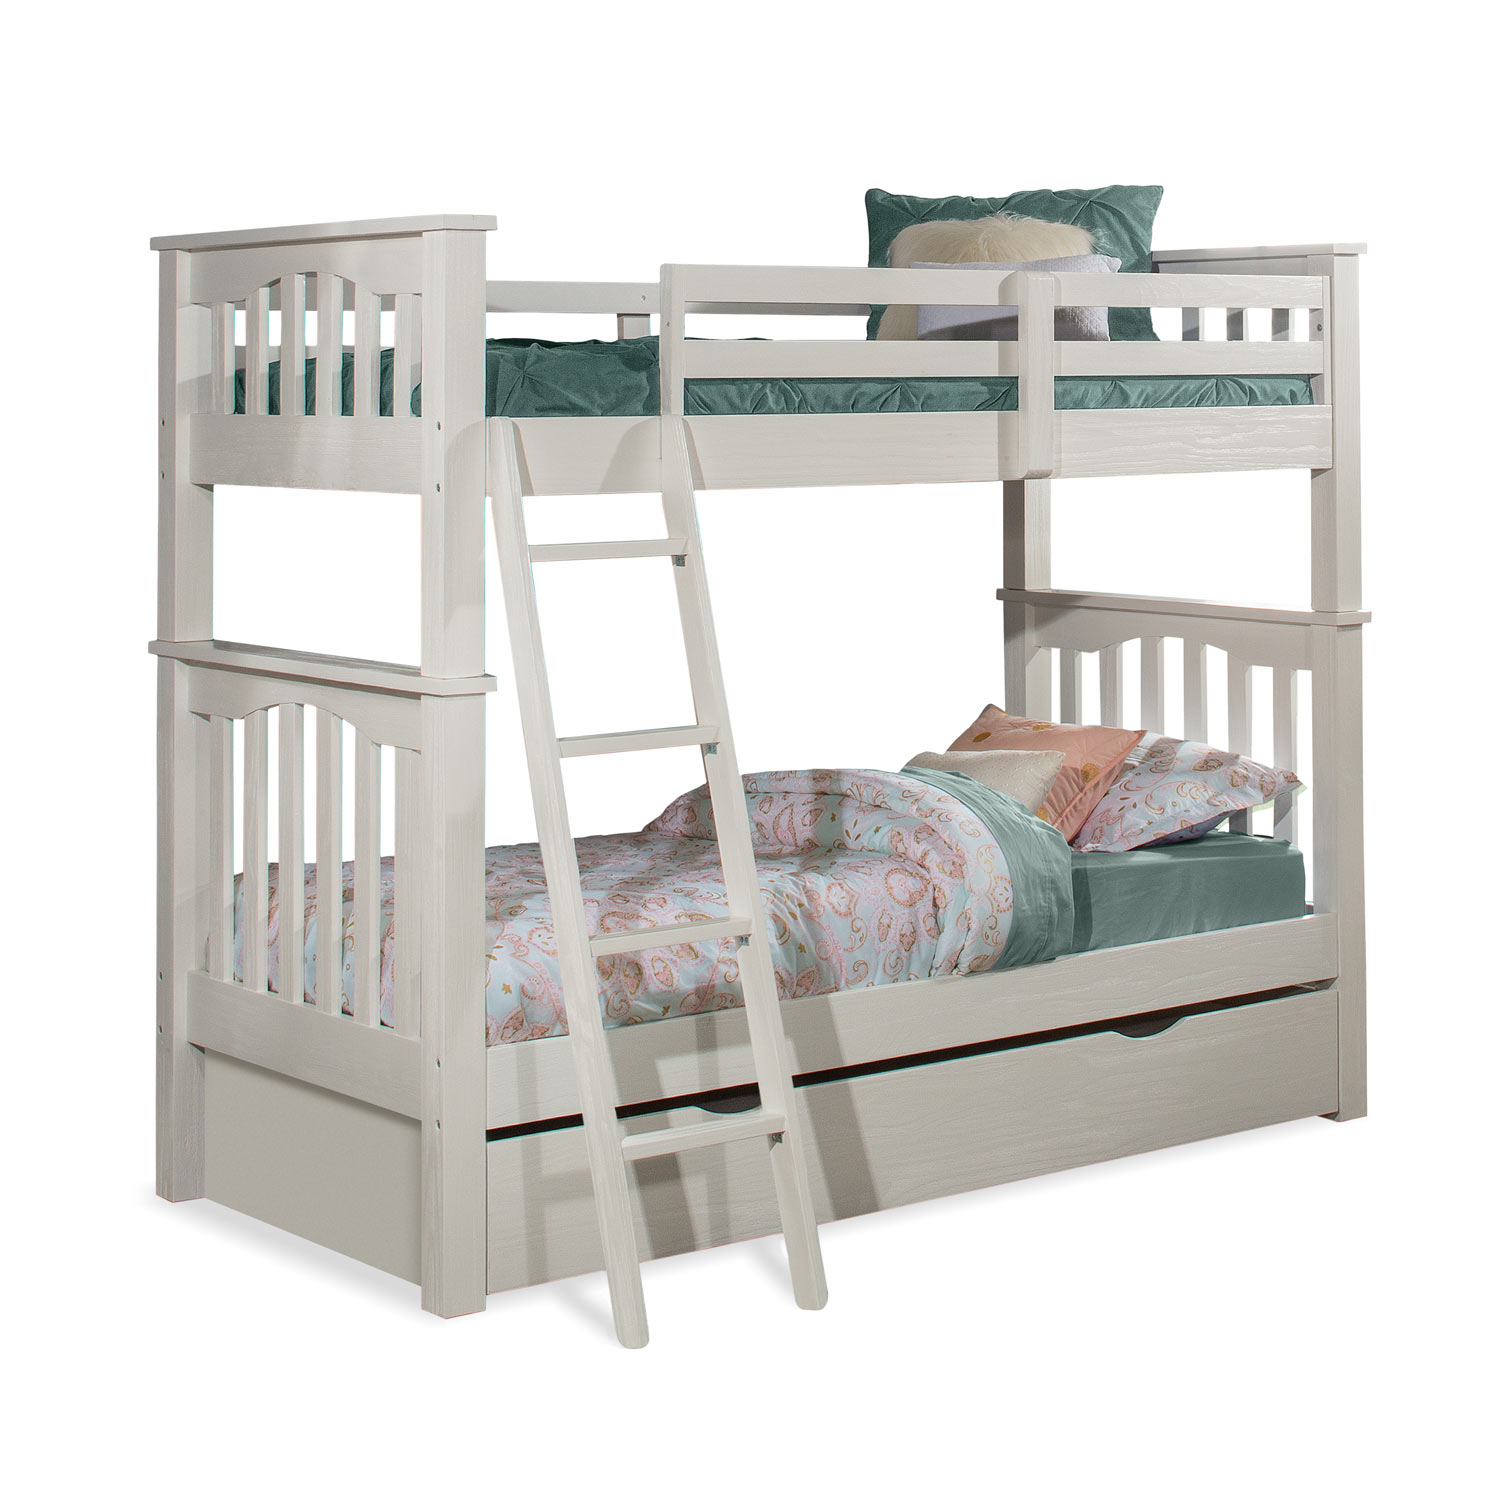 NE Kids Highlands Harper Twin/Twin Bunk Bed with Trundle - White Finish